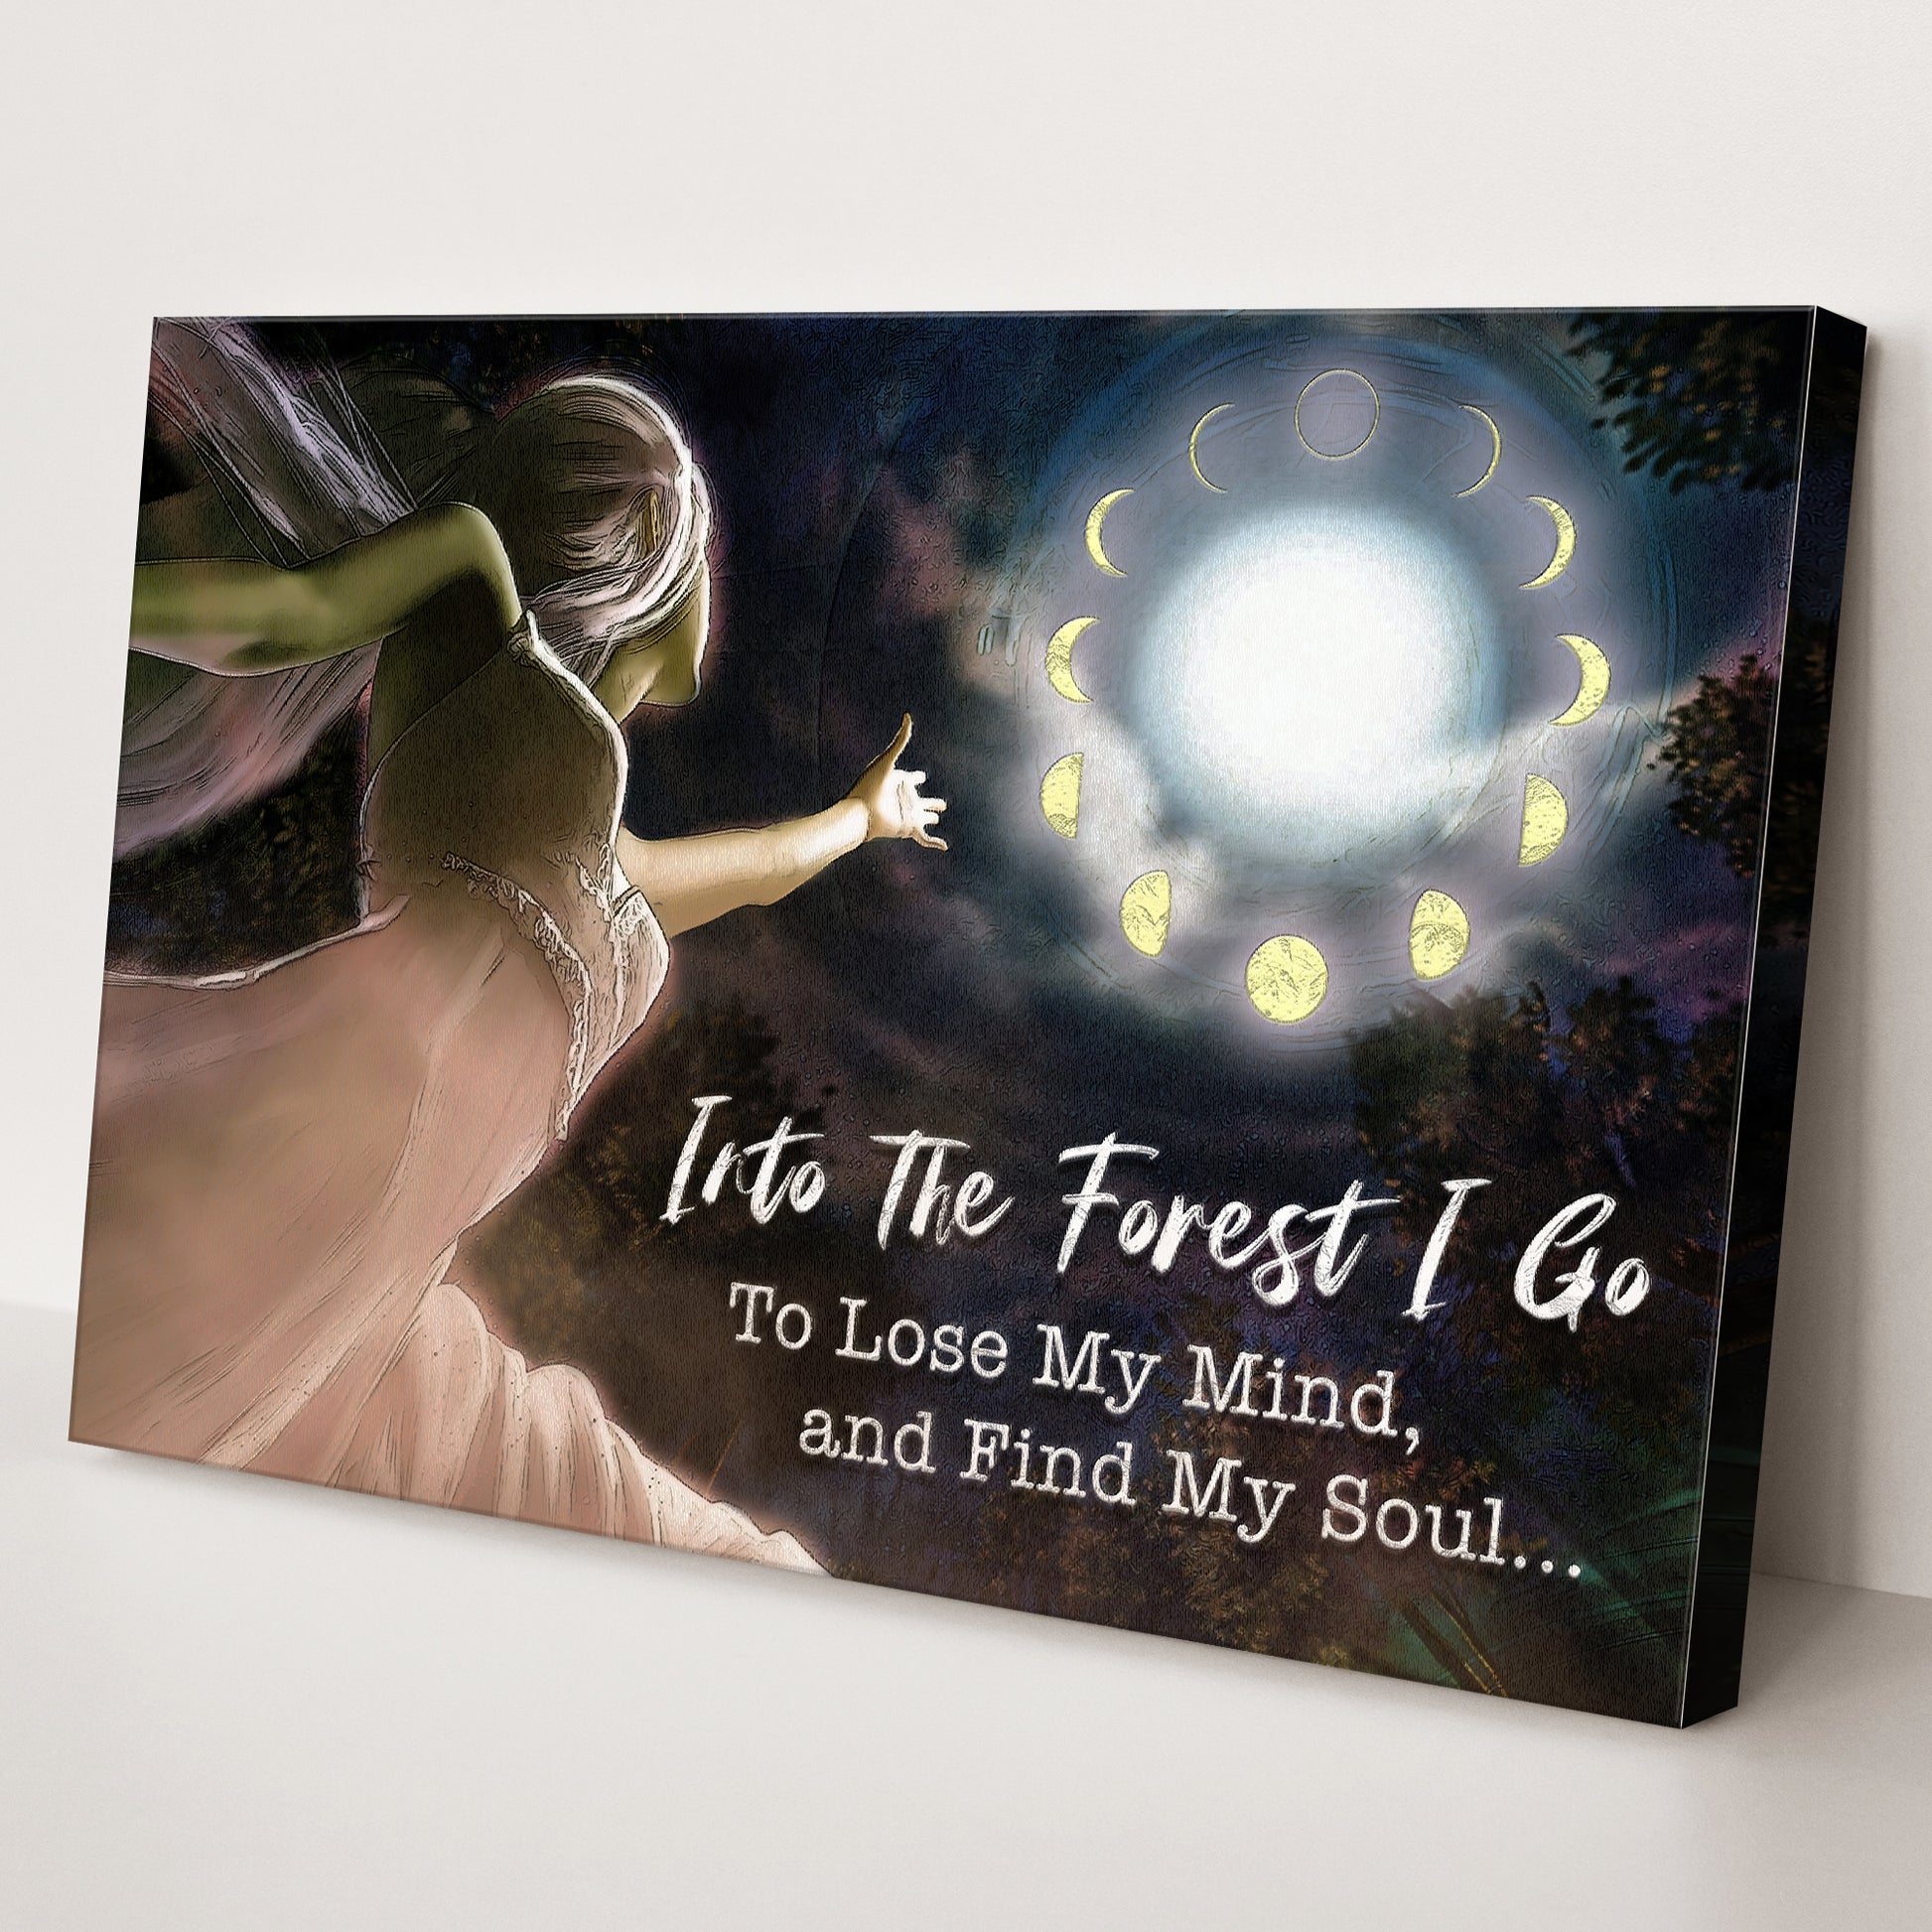 Into The Forest I Go Nature Sign - Image by Tailored Canvases